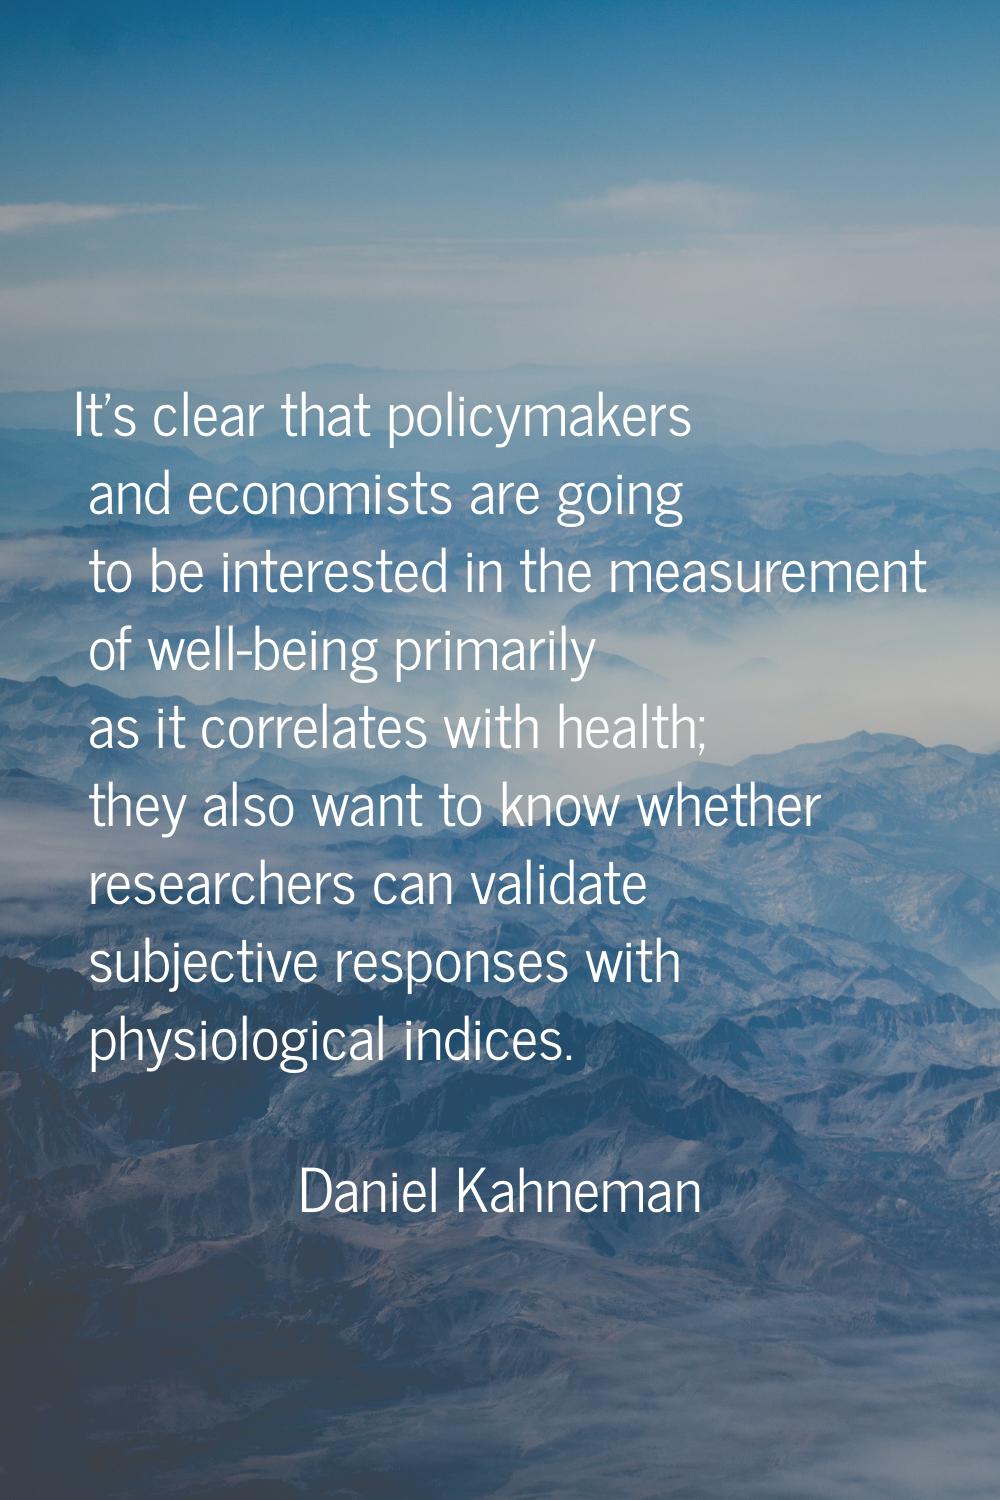 It's clear that policymakers and economists are going to be interested in the measurement of well-b